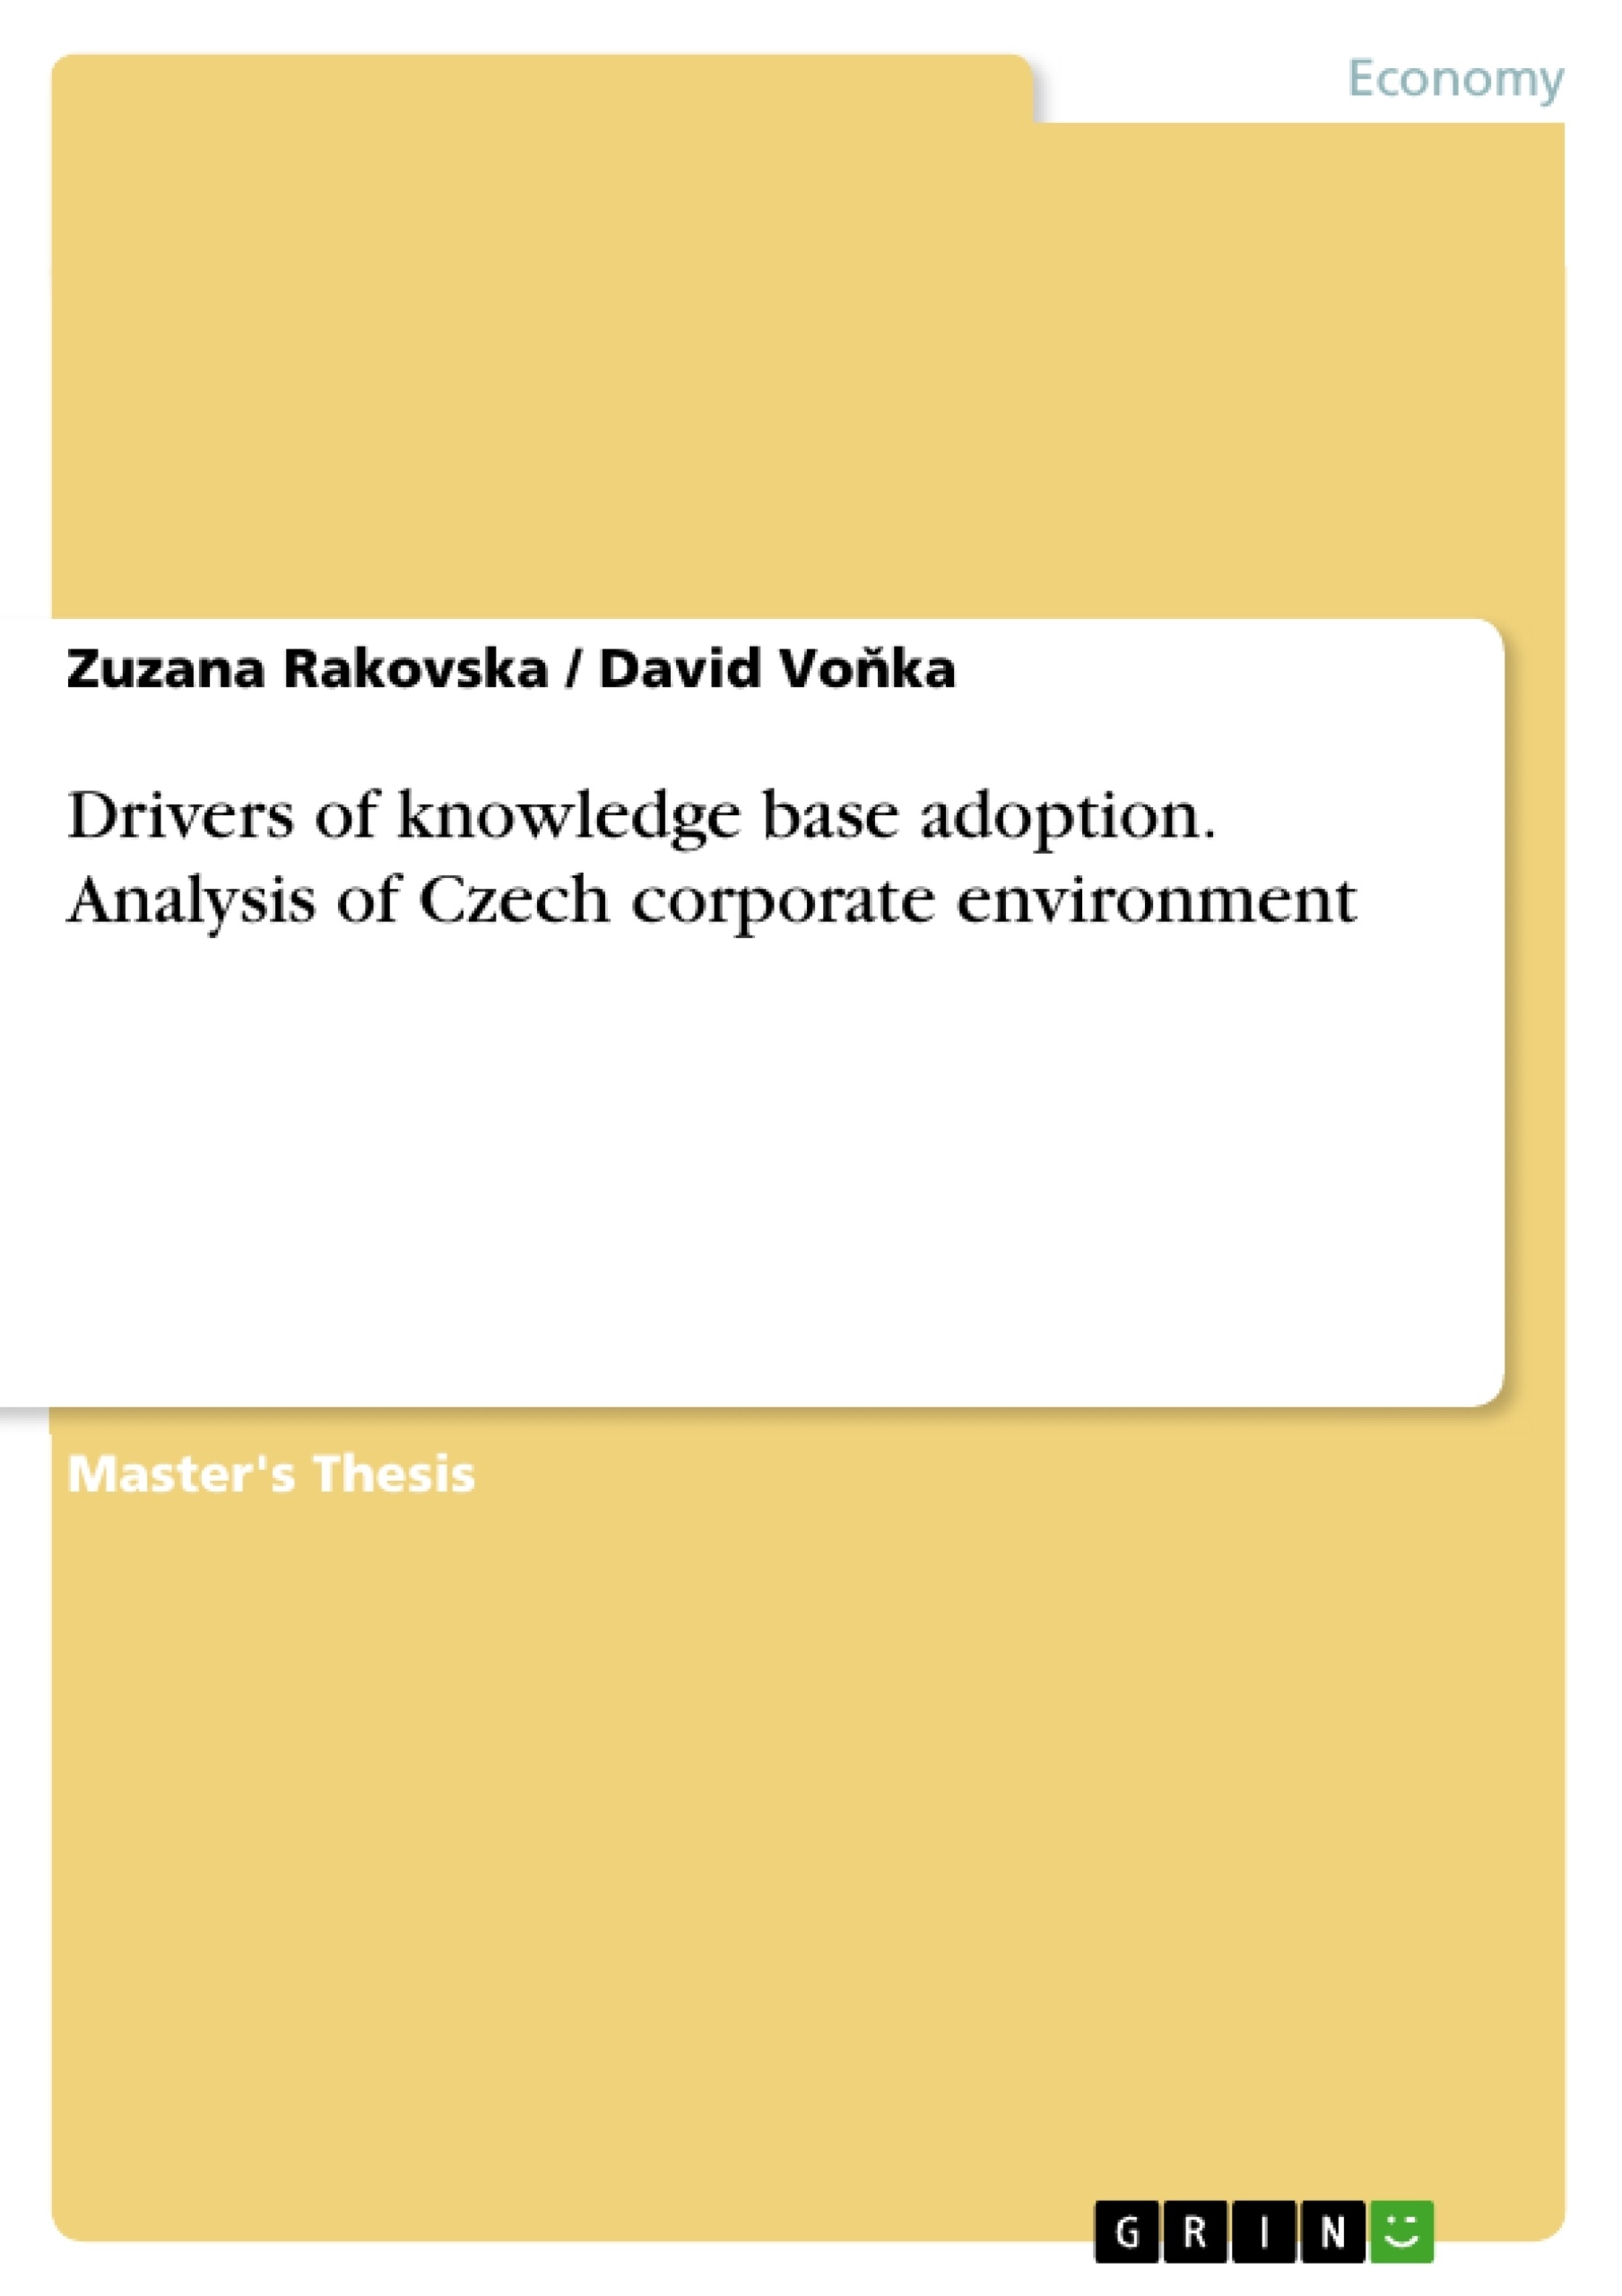 Titel: Drivers of knowledge base adoption. Analysis of Czech corporate environment